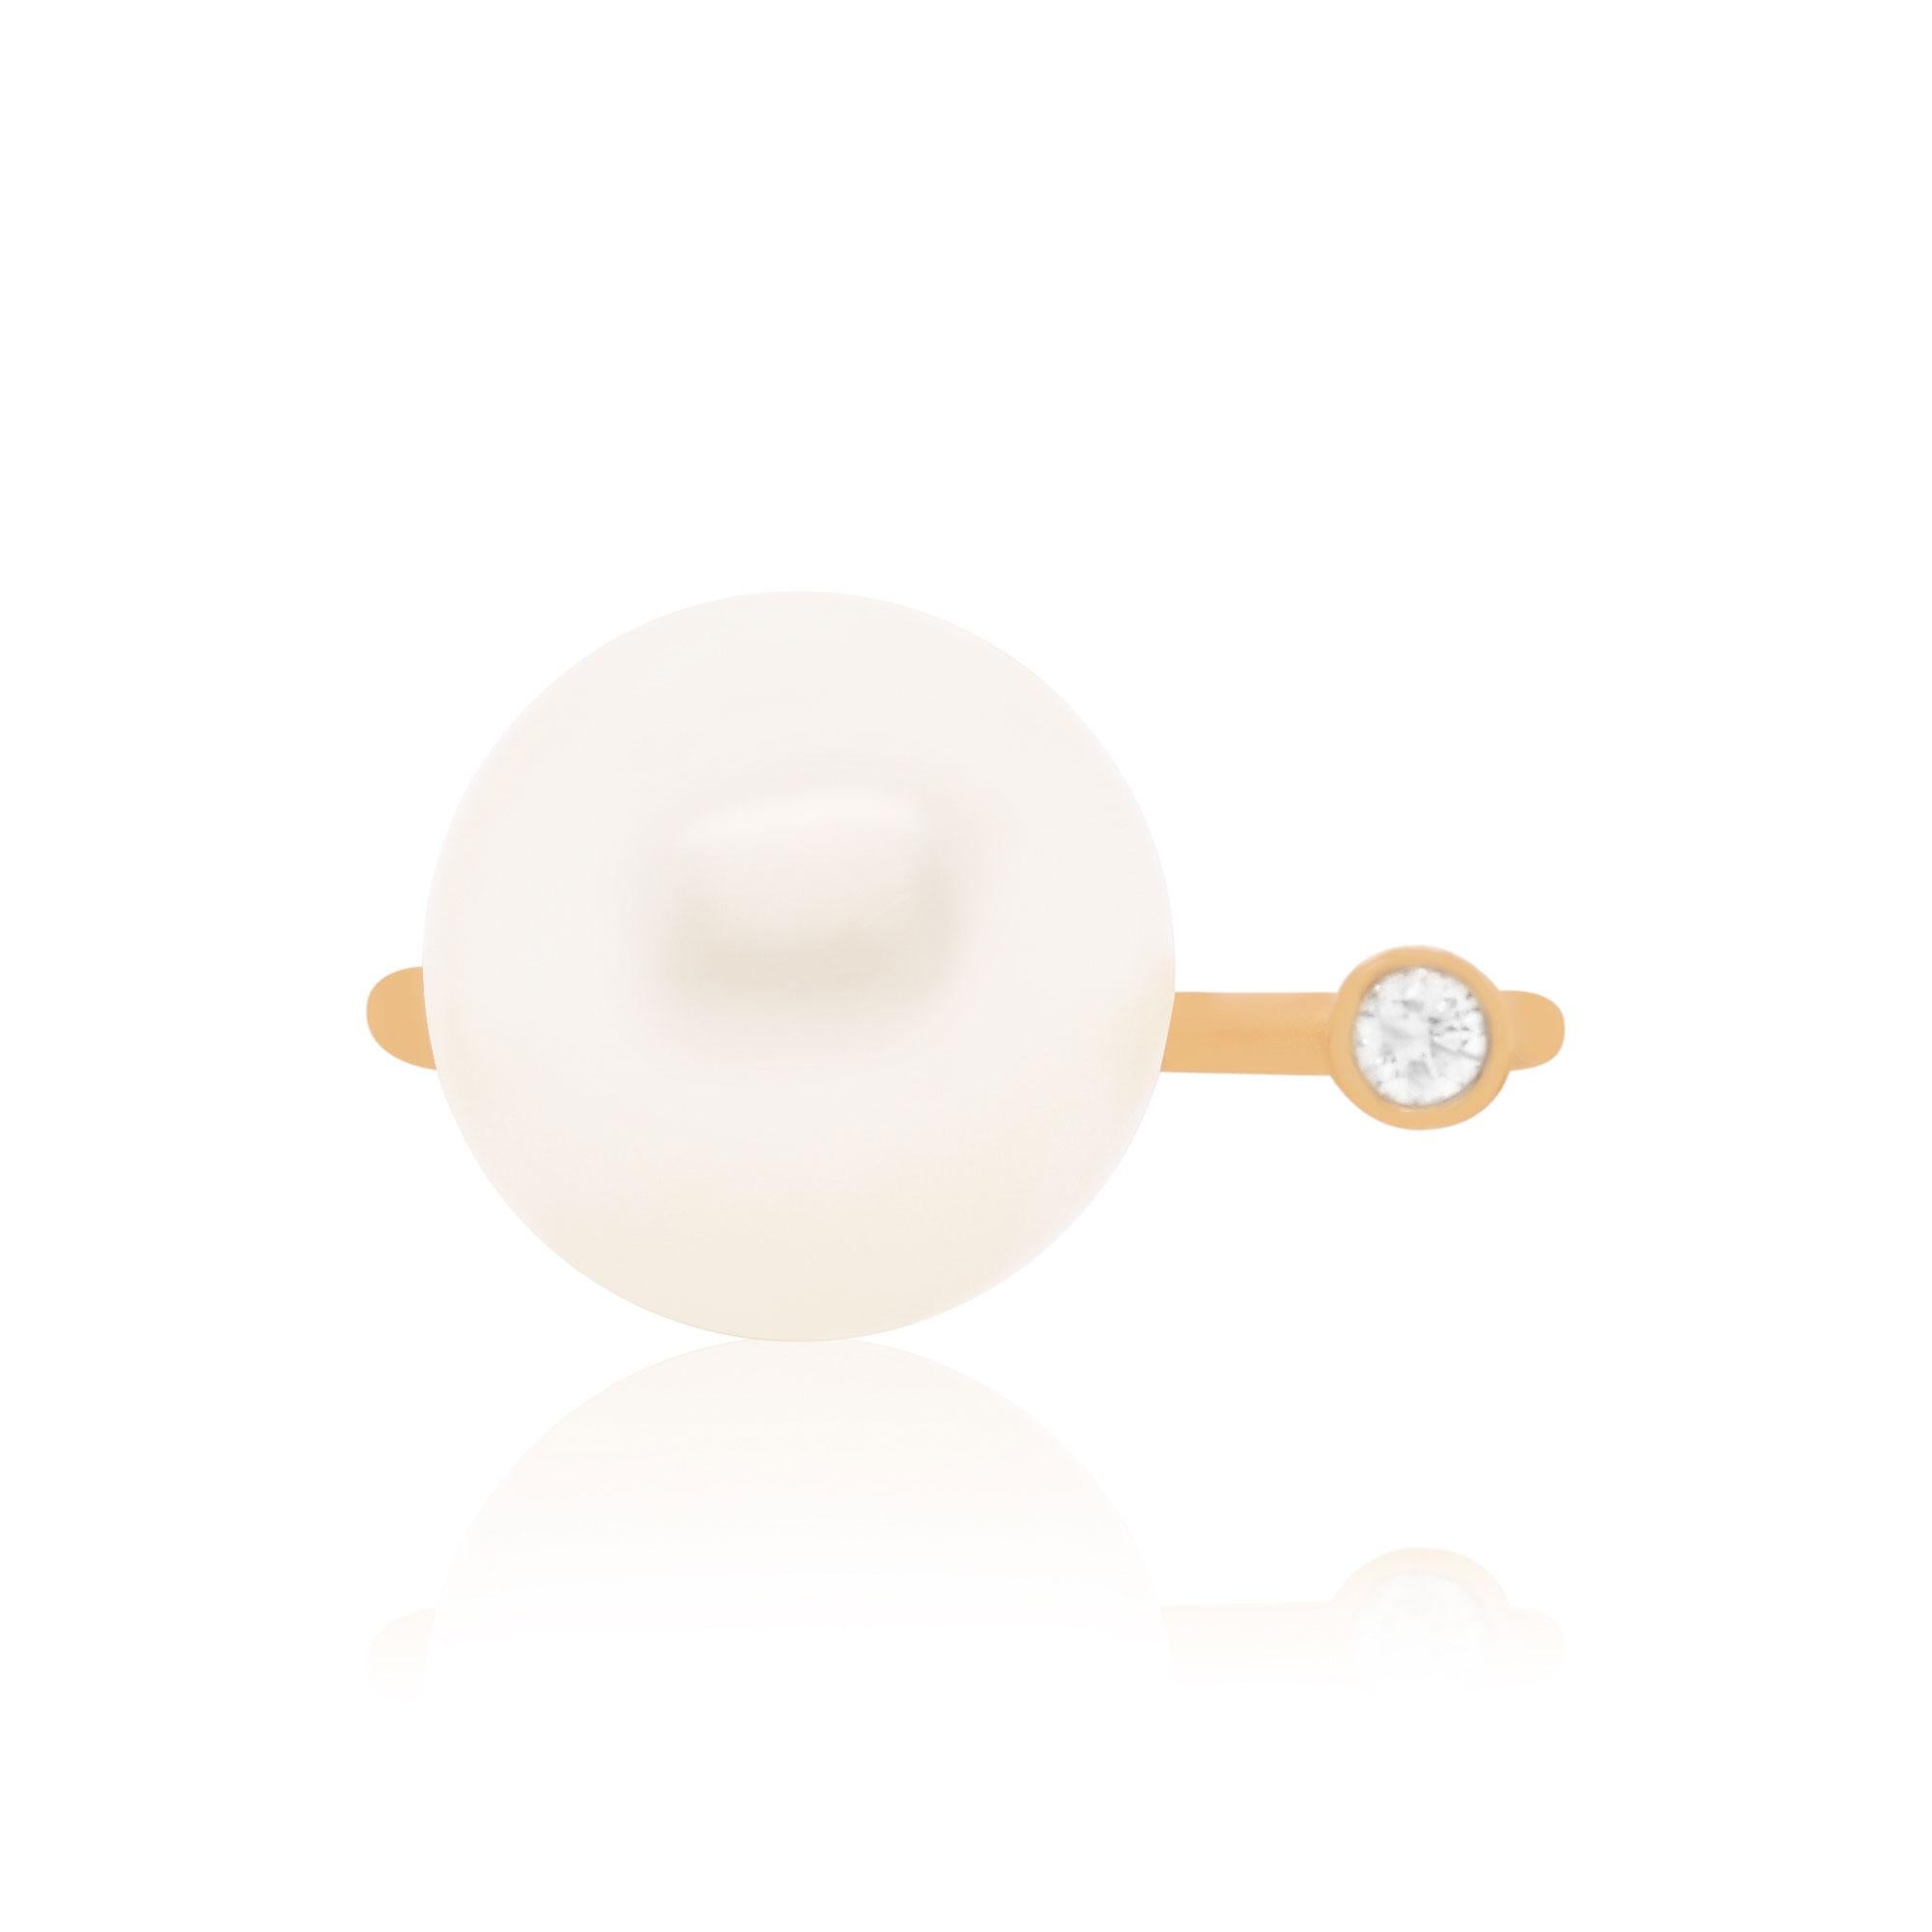 Contemporary 2.13 Carat Round South Sea Pearl and White Diamond Ring 14 Karat Yellow Gold